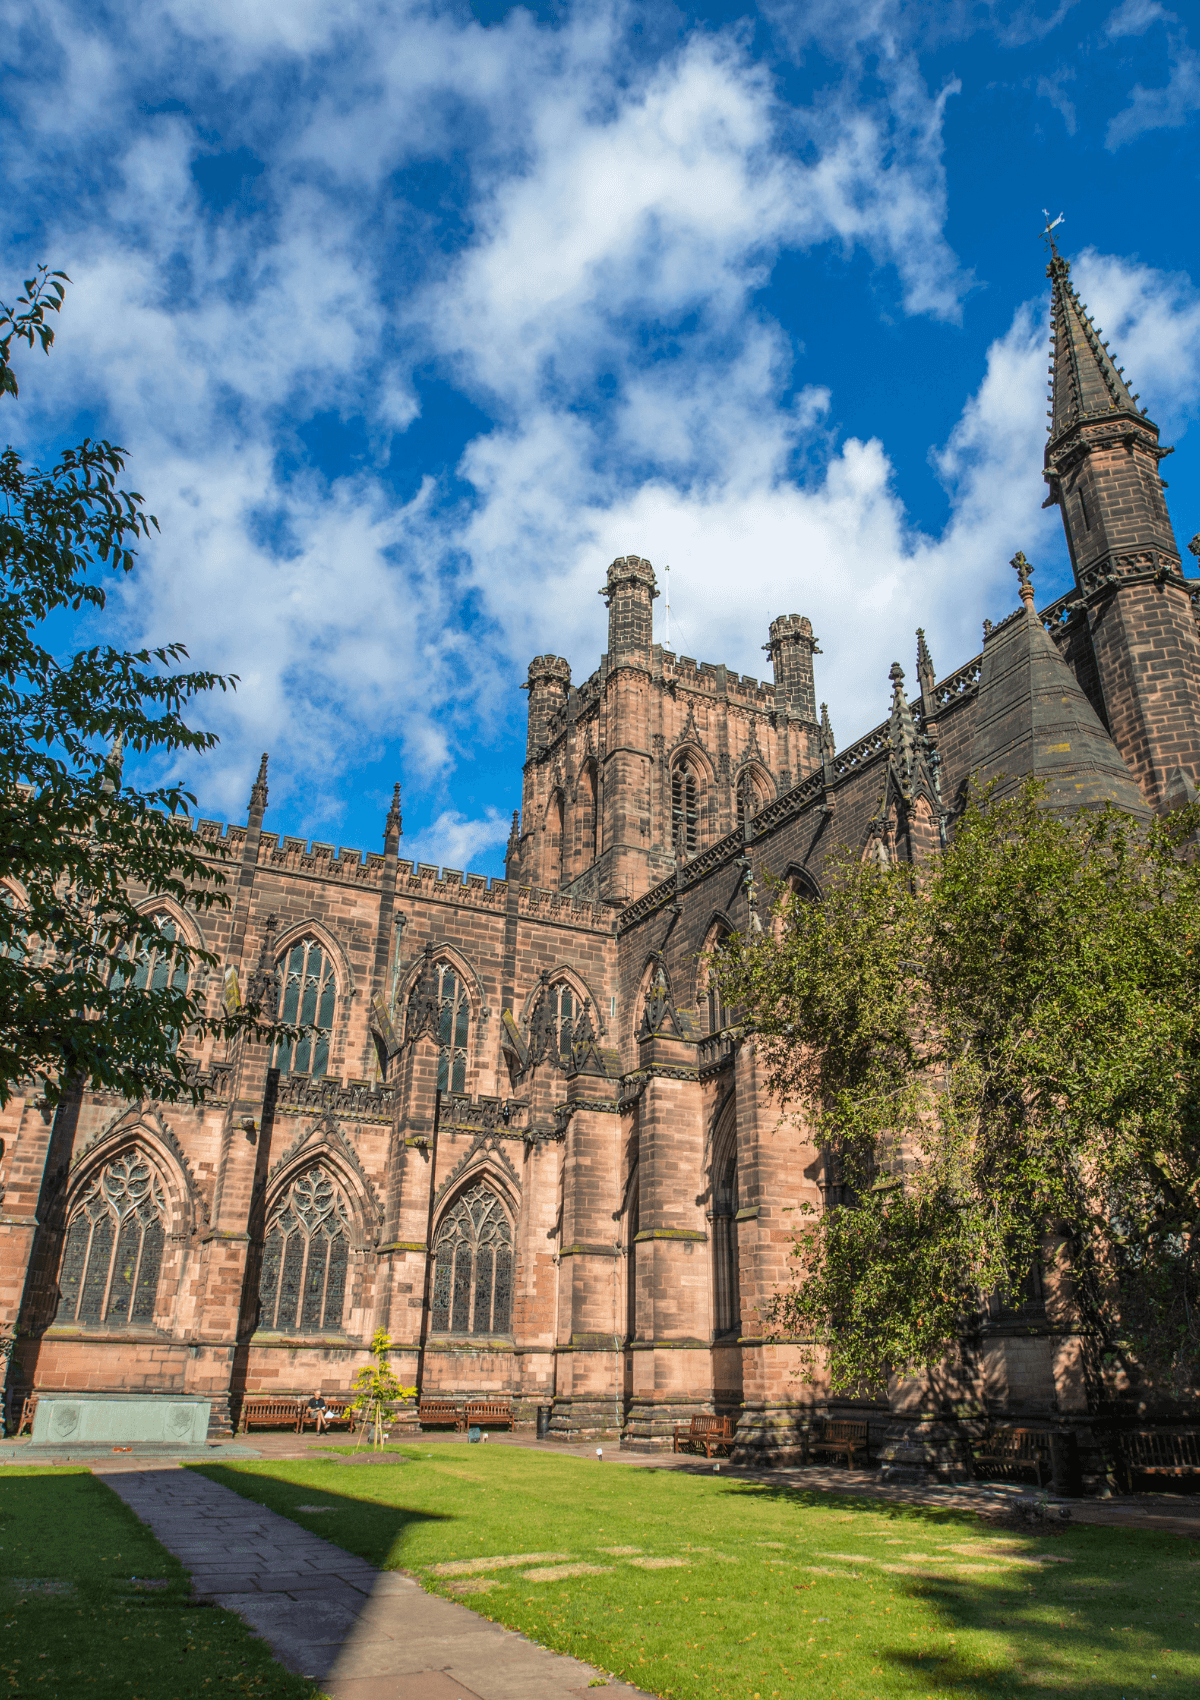 Chester Cathedral is a must-see attraction in a city guide